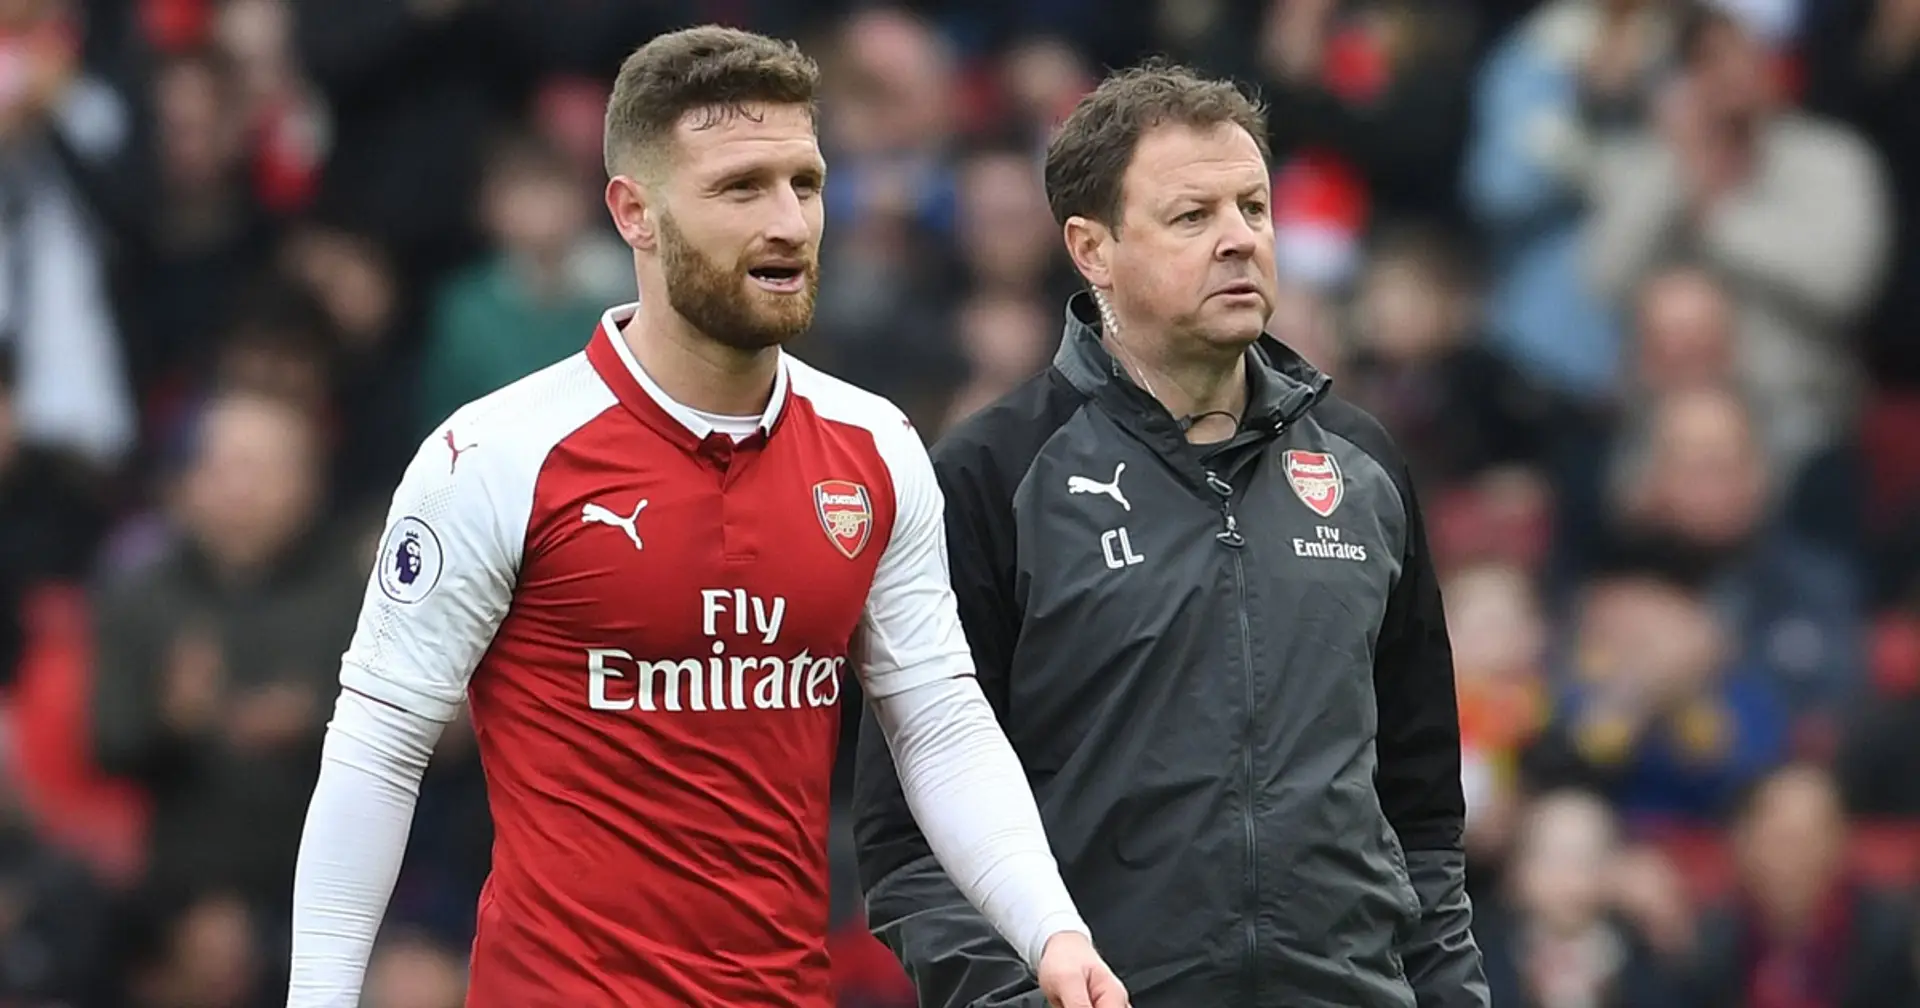 'A medical is a risk assessment of what value club will get out of player': former Arsenal physio Colin Lewin walks us through pre-transfer routine